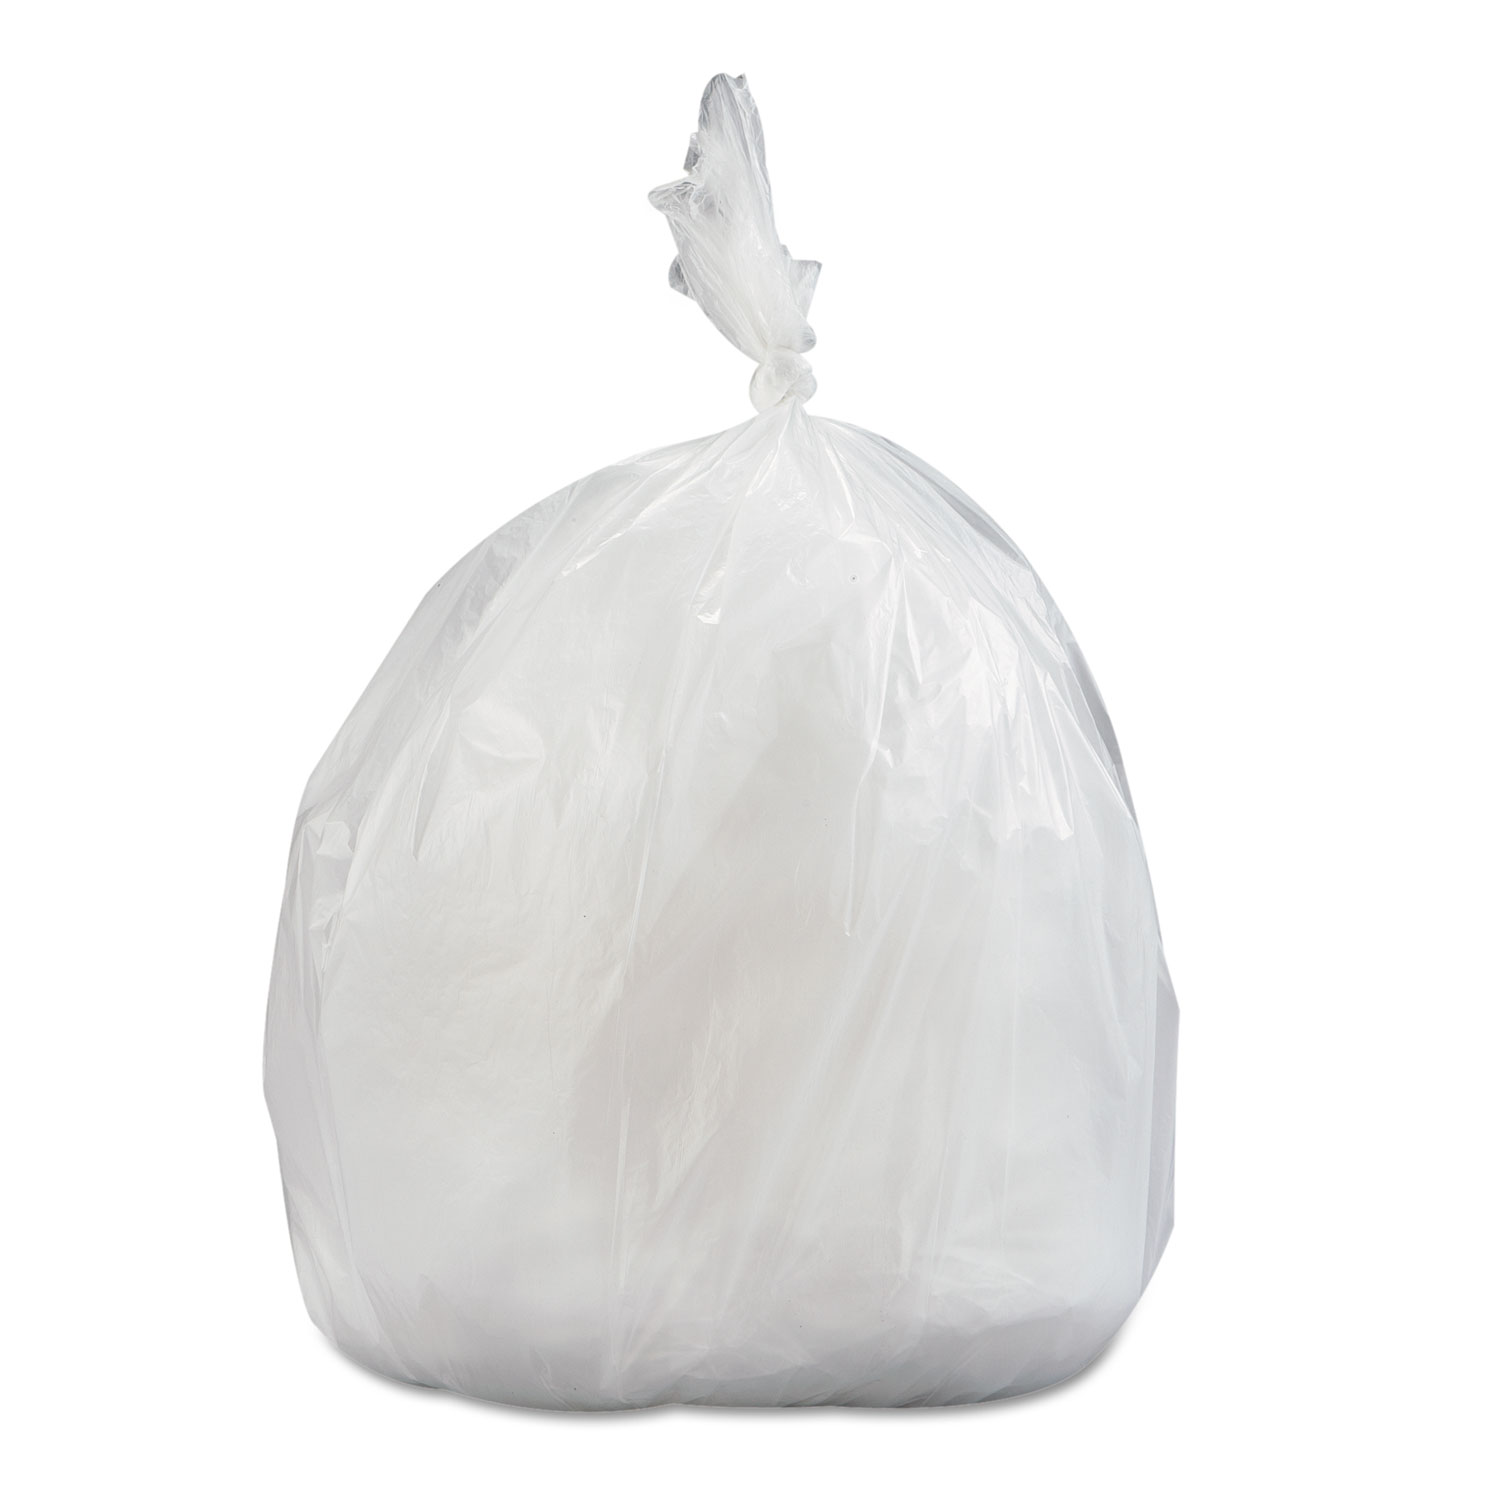 Inteplast Group High-Density Can Liner 33 x 40 33gal 13mic Clear